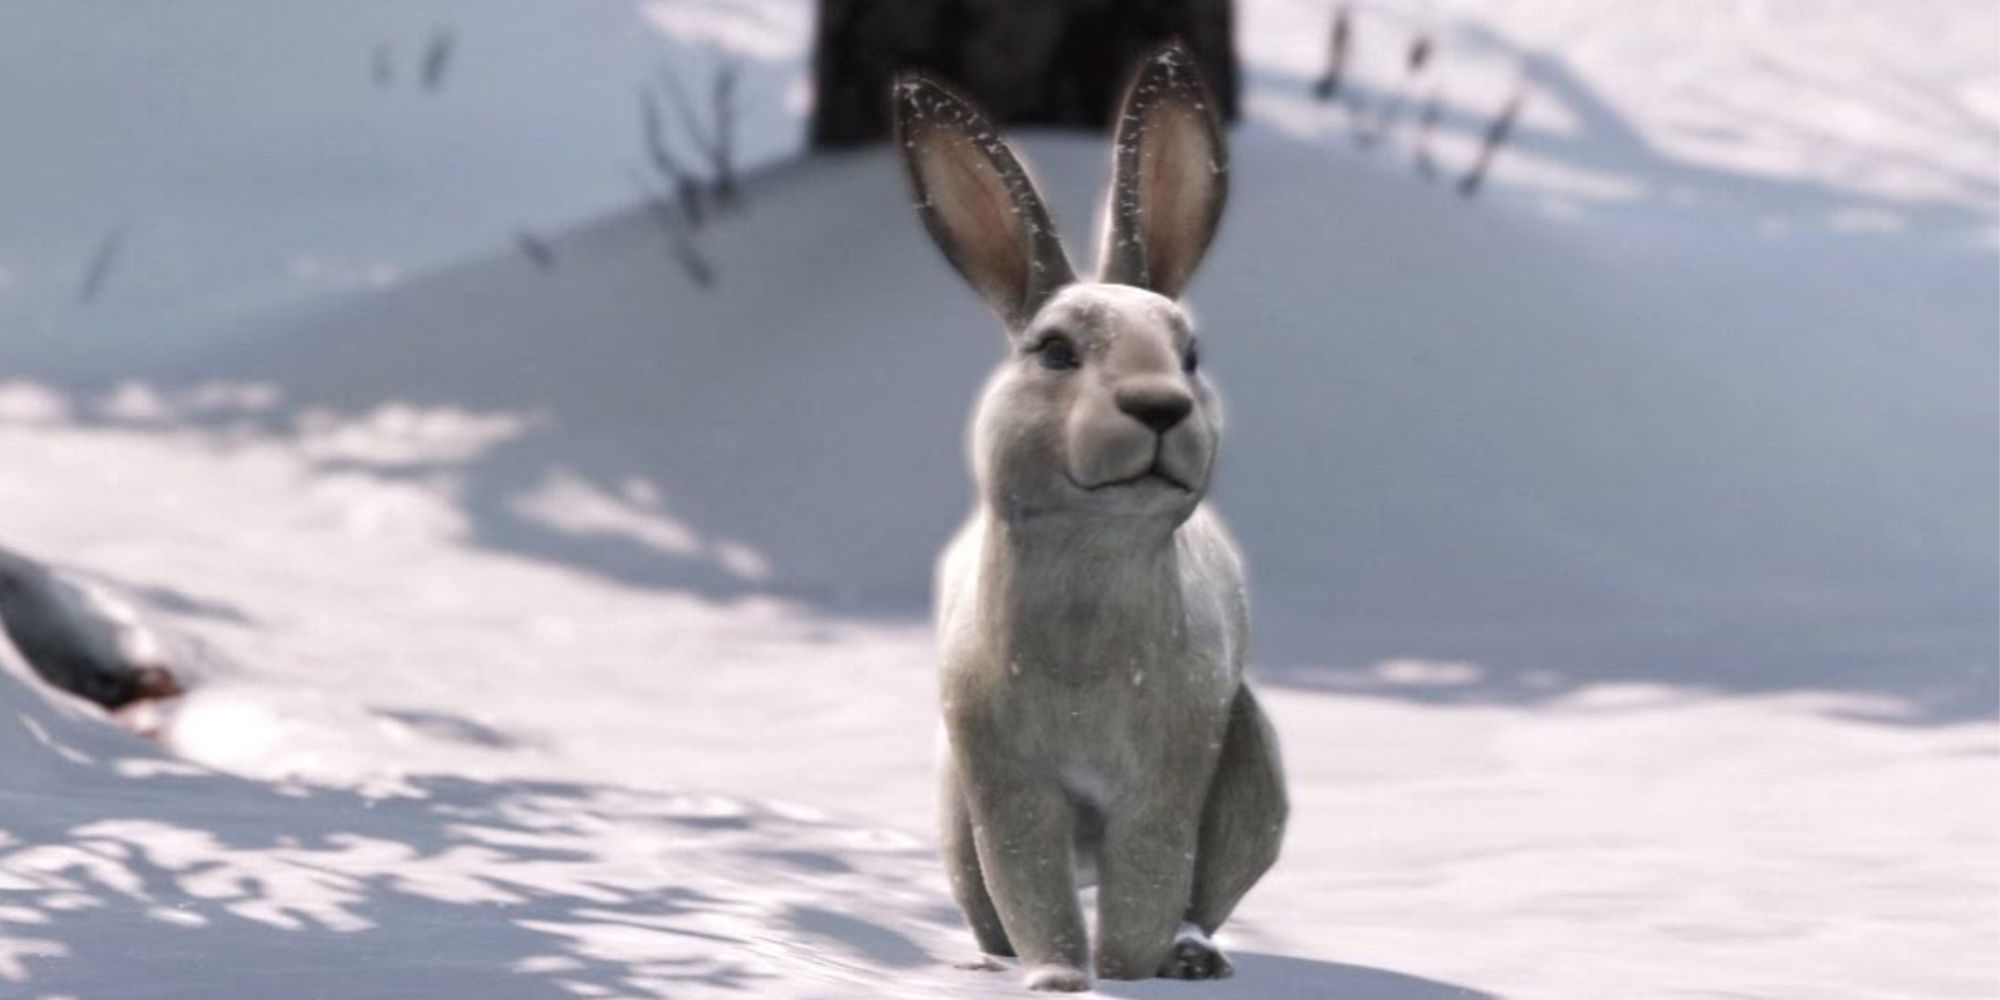 Great News: That Bunny Survived The Latest Episode Of The Last Of Us